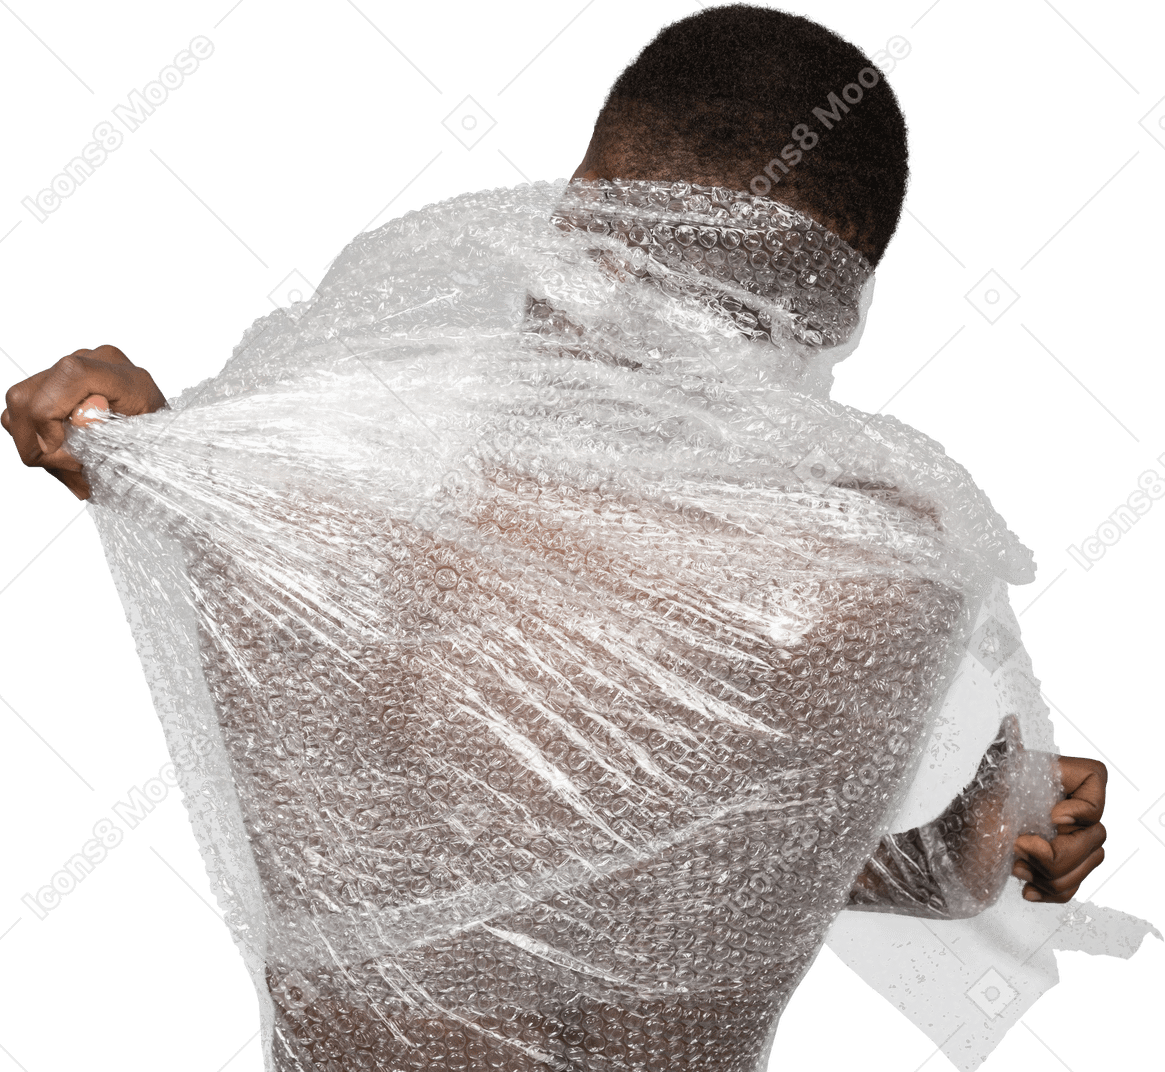 Pack view of an african male tearing up the plastic wrap